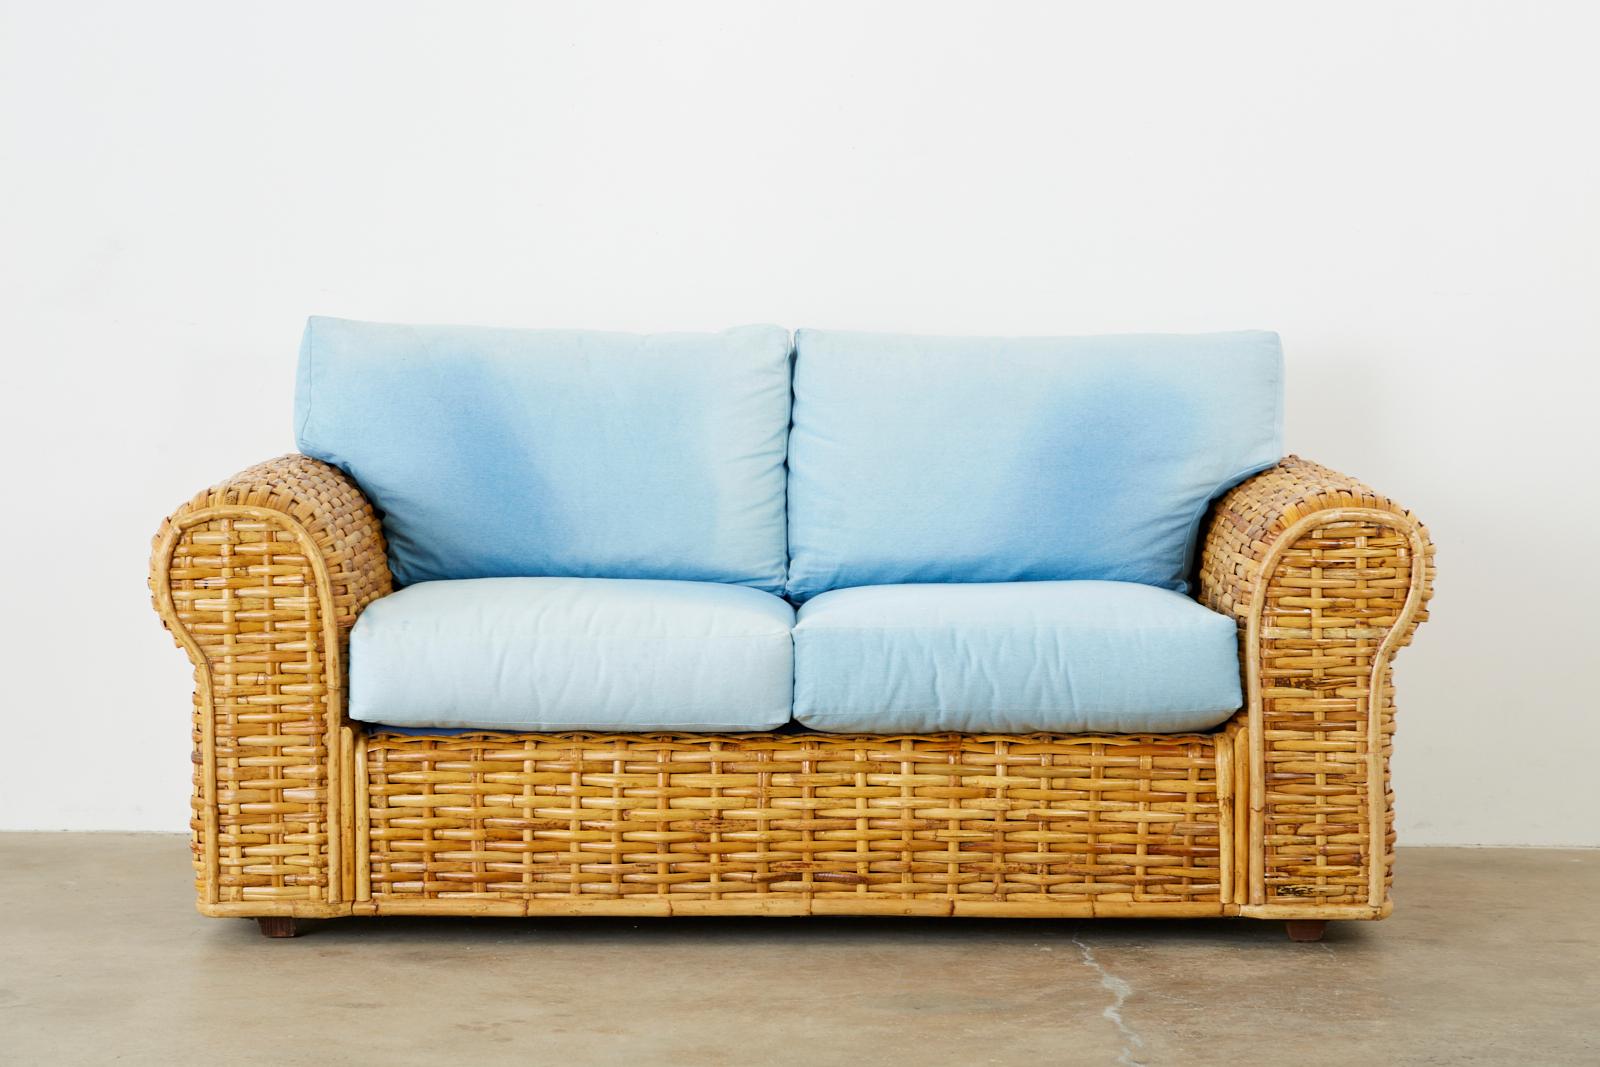 Distinctive settee or loveseat by Ralph Lauren Polo collection constructed from woven bamboo rattan reeds. Features a blue ombre faded soft denim style cotton fabric that has a lovely age and color. Made in the organic modern style of the late 20th